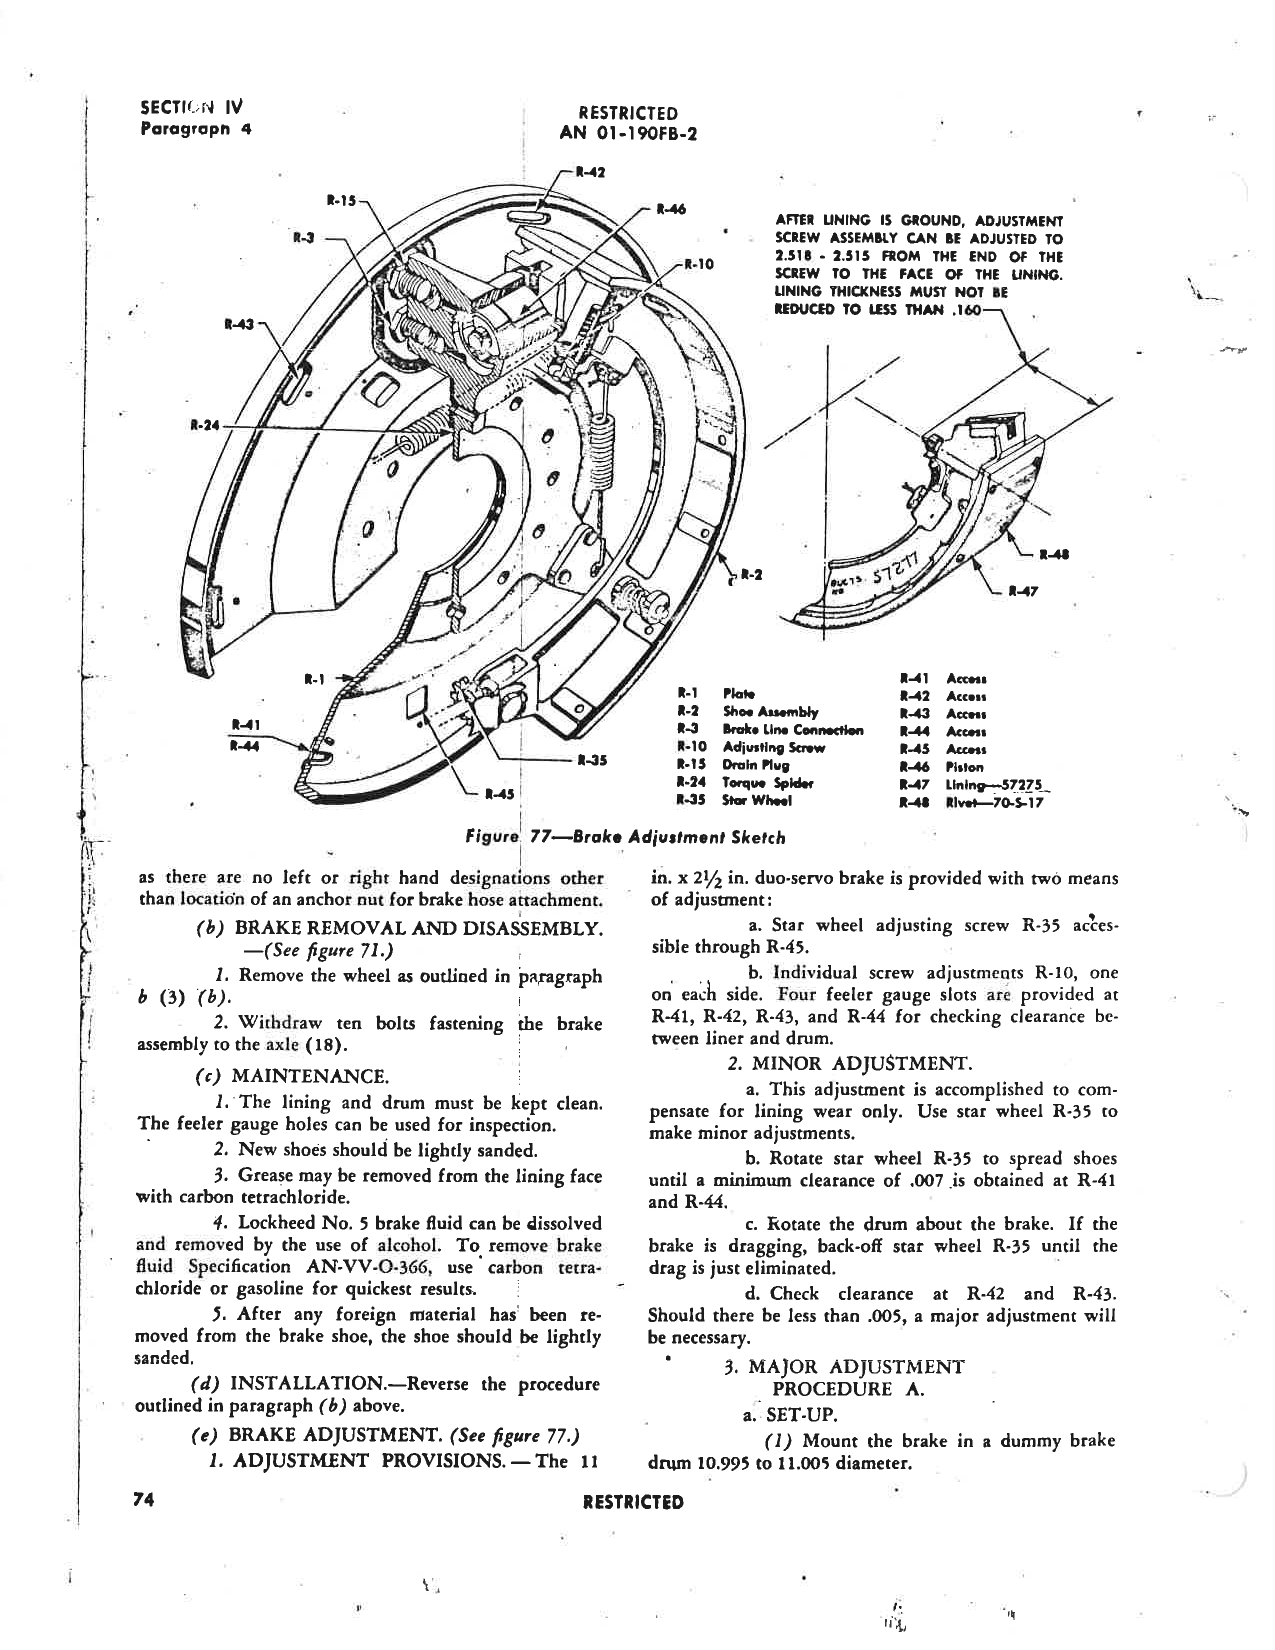 Sample page 87 from AirCorps Library document: Wildcat FM-2 - Preliminary Erection & Maintenance Handbook